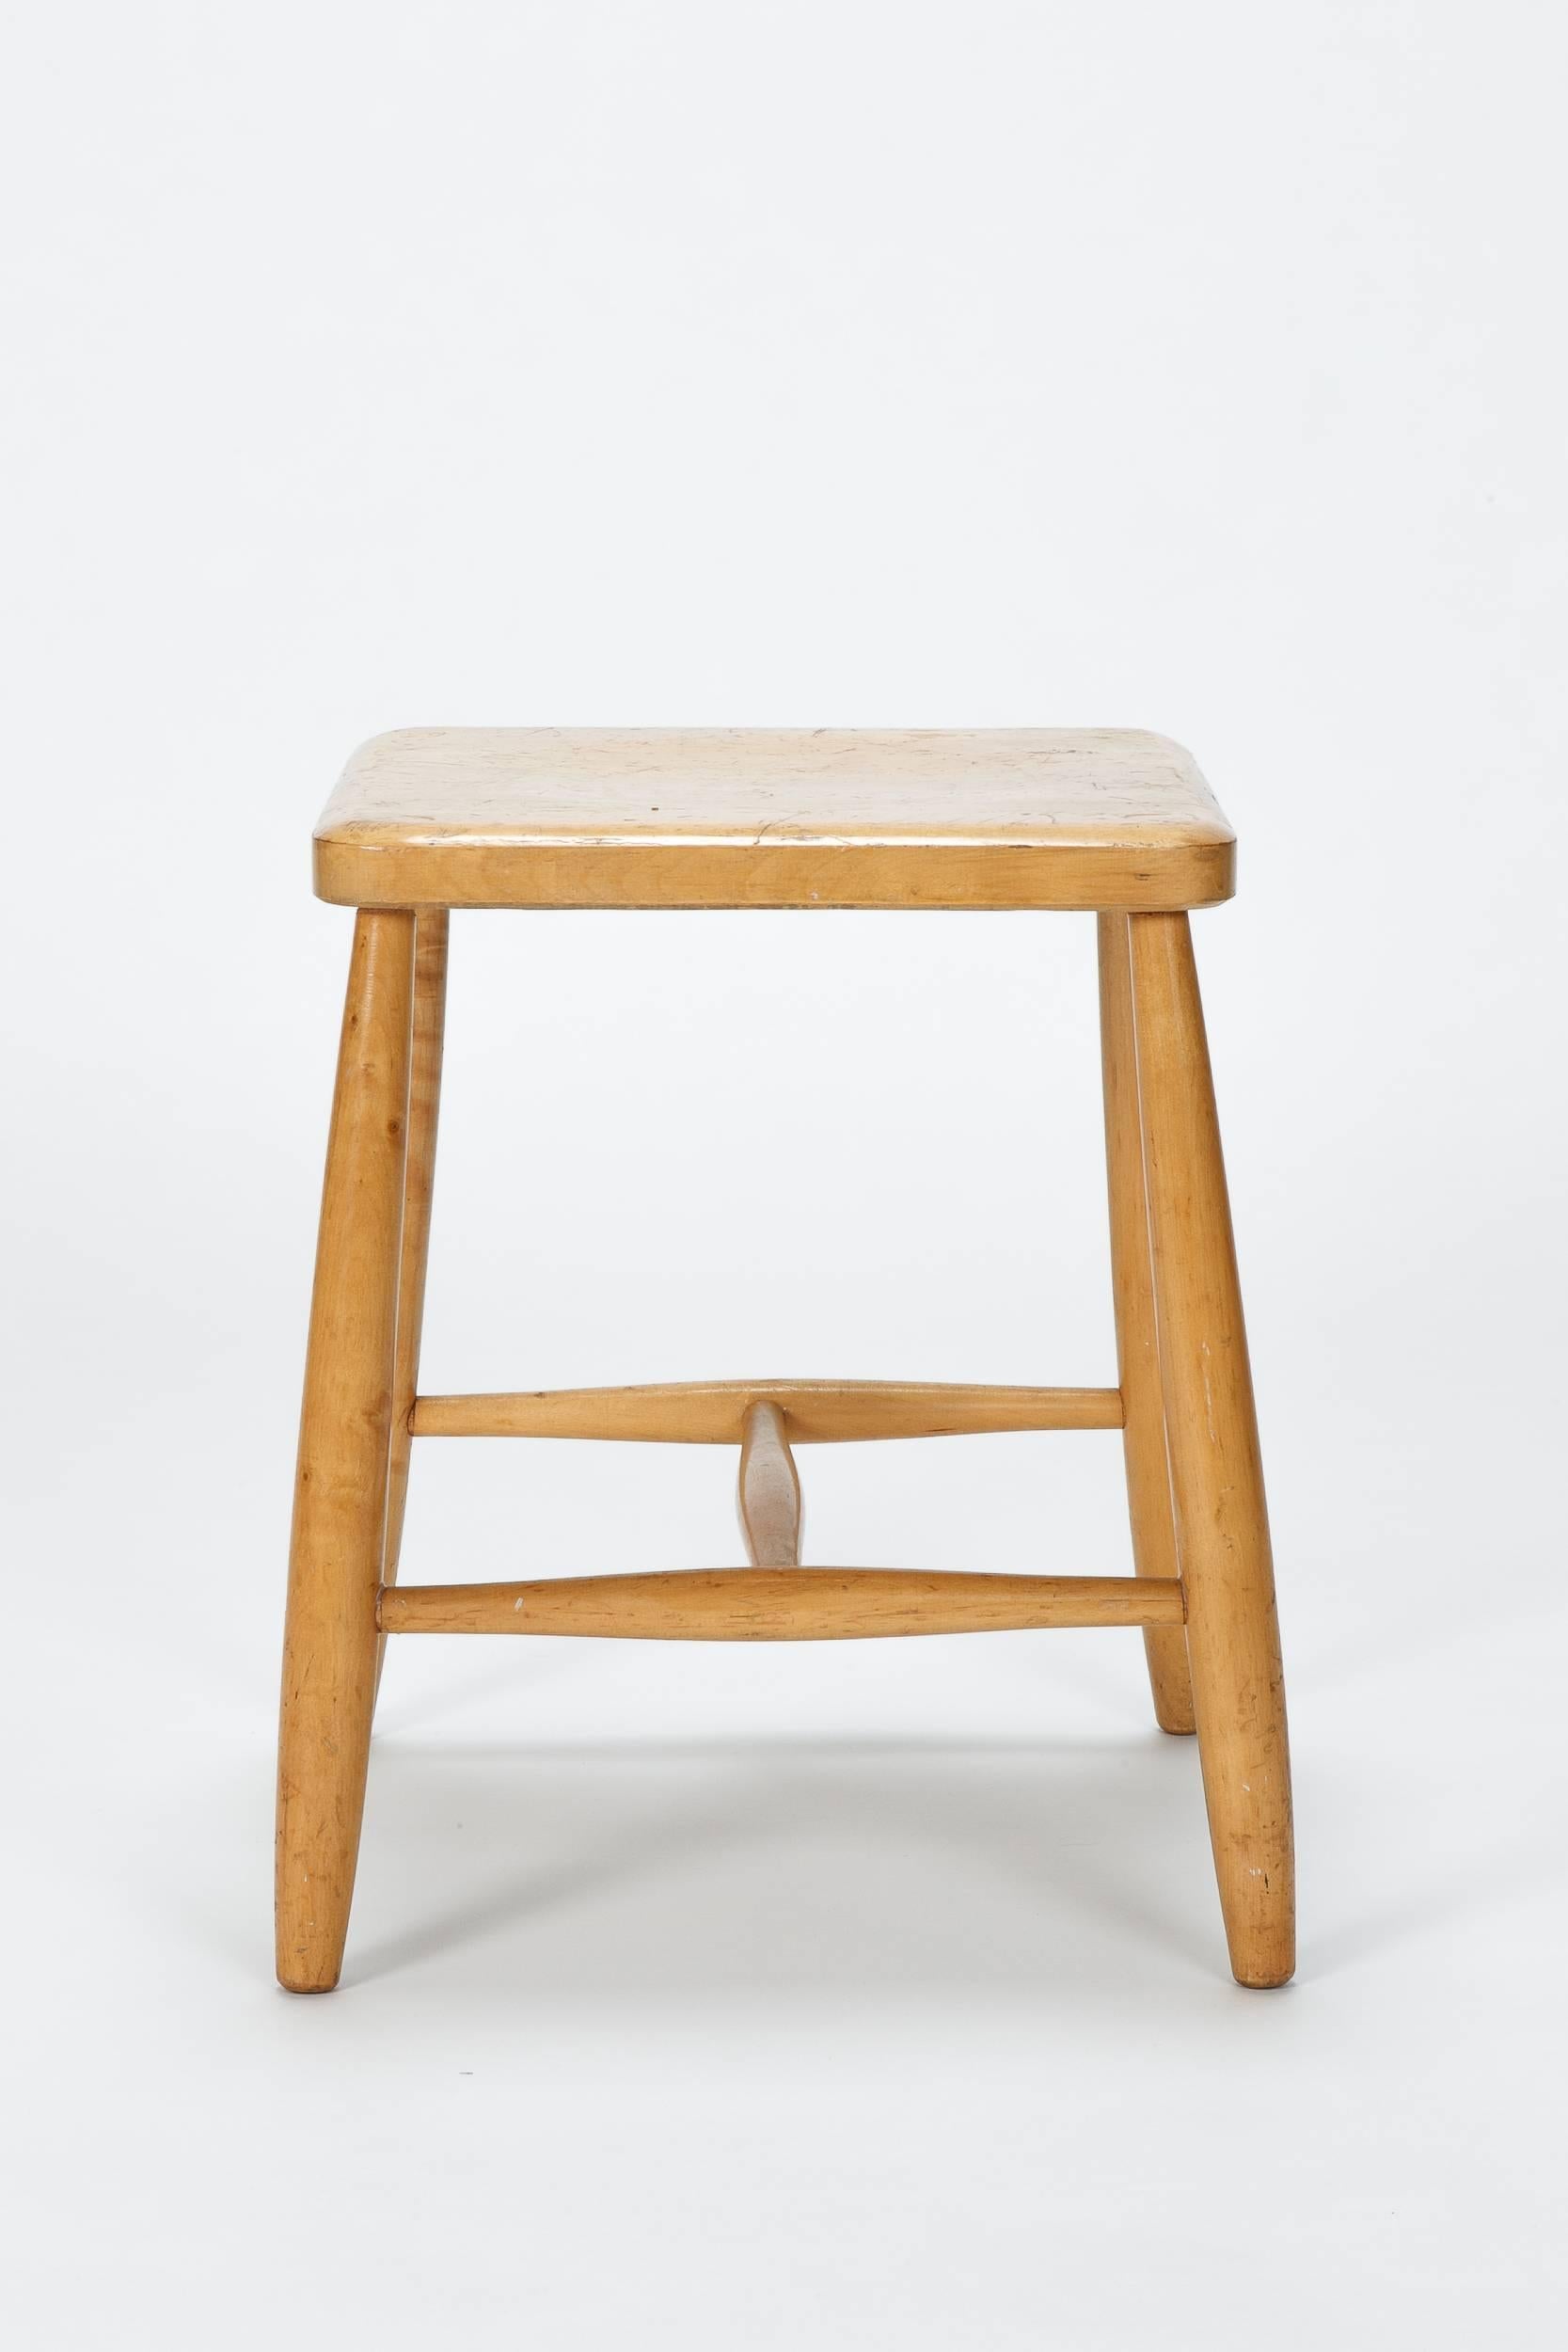 Ilmari Tapiovaara stool for the Swedish manufacturer Hagafors in the 1950s. Completely made of solid birch wood in a very durable construction. Beautiful vintage patina.